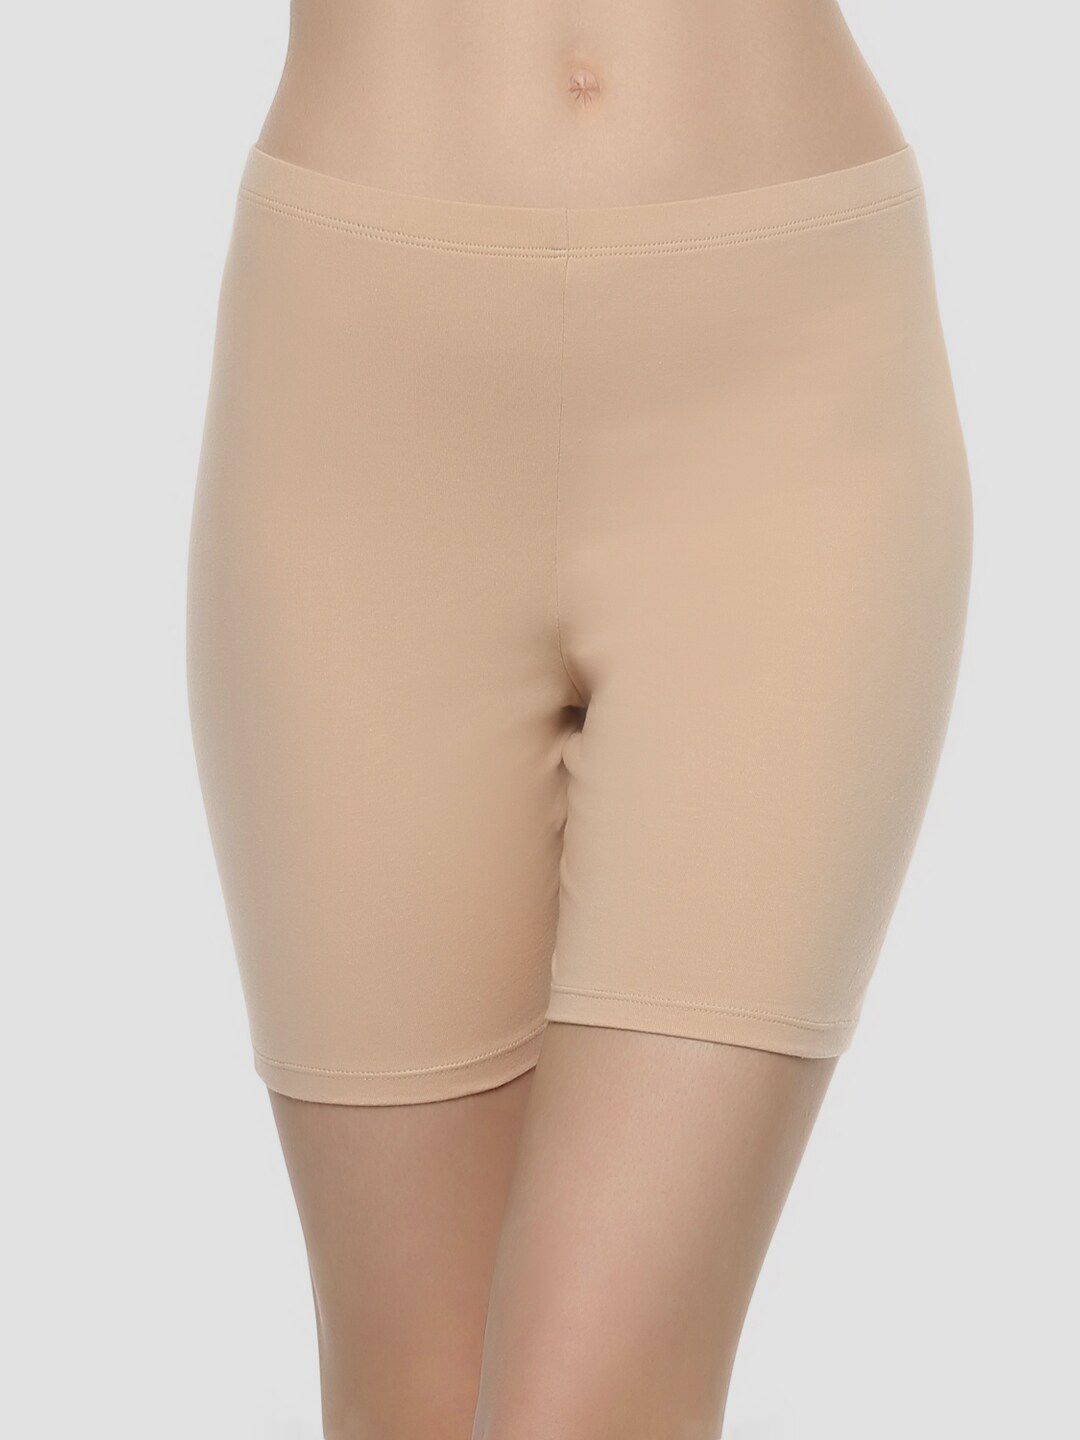 Soie Women Nude-Coloured Solid Cycling Shorts CS-1 Price in India